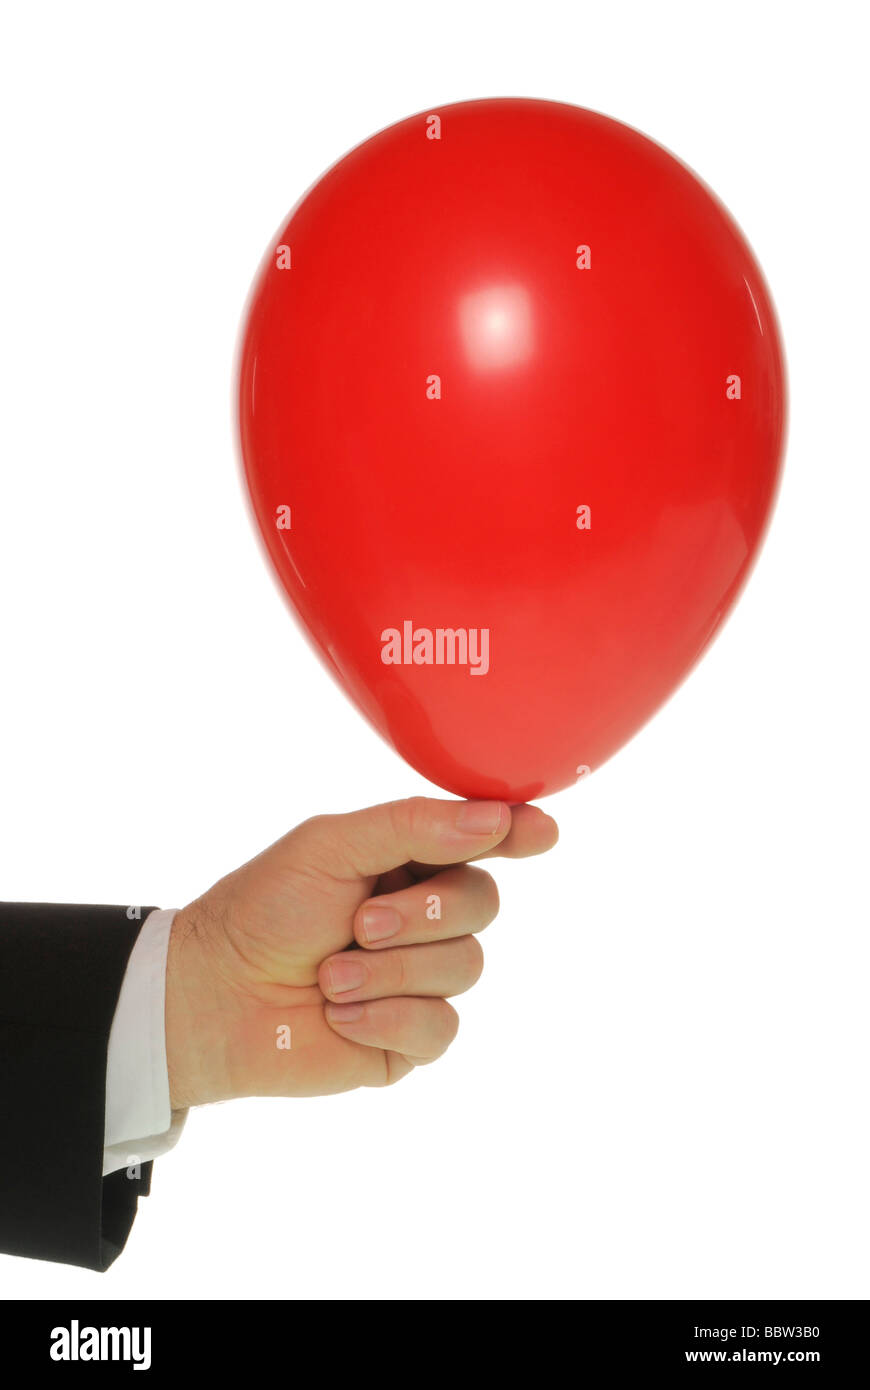 Manager's hand holding a balloon Stock Photo